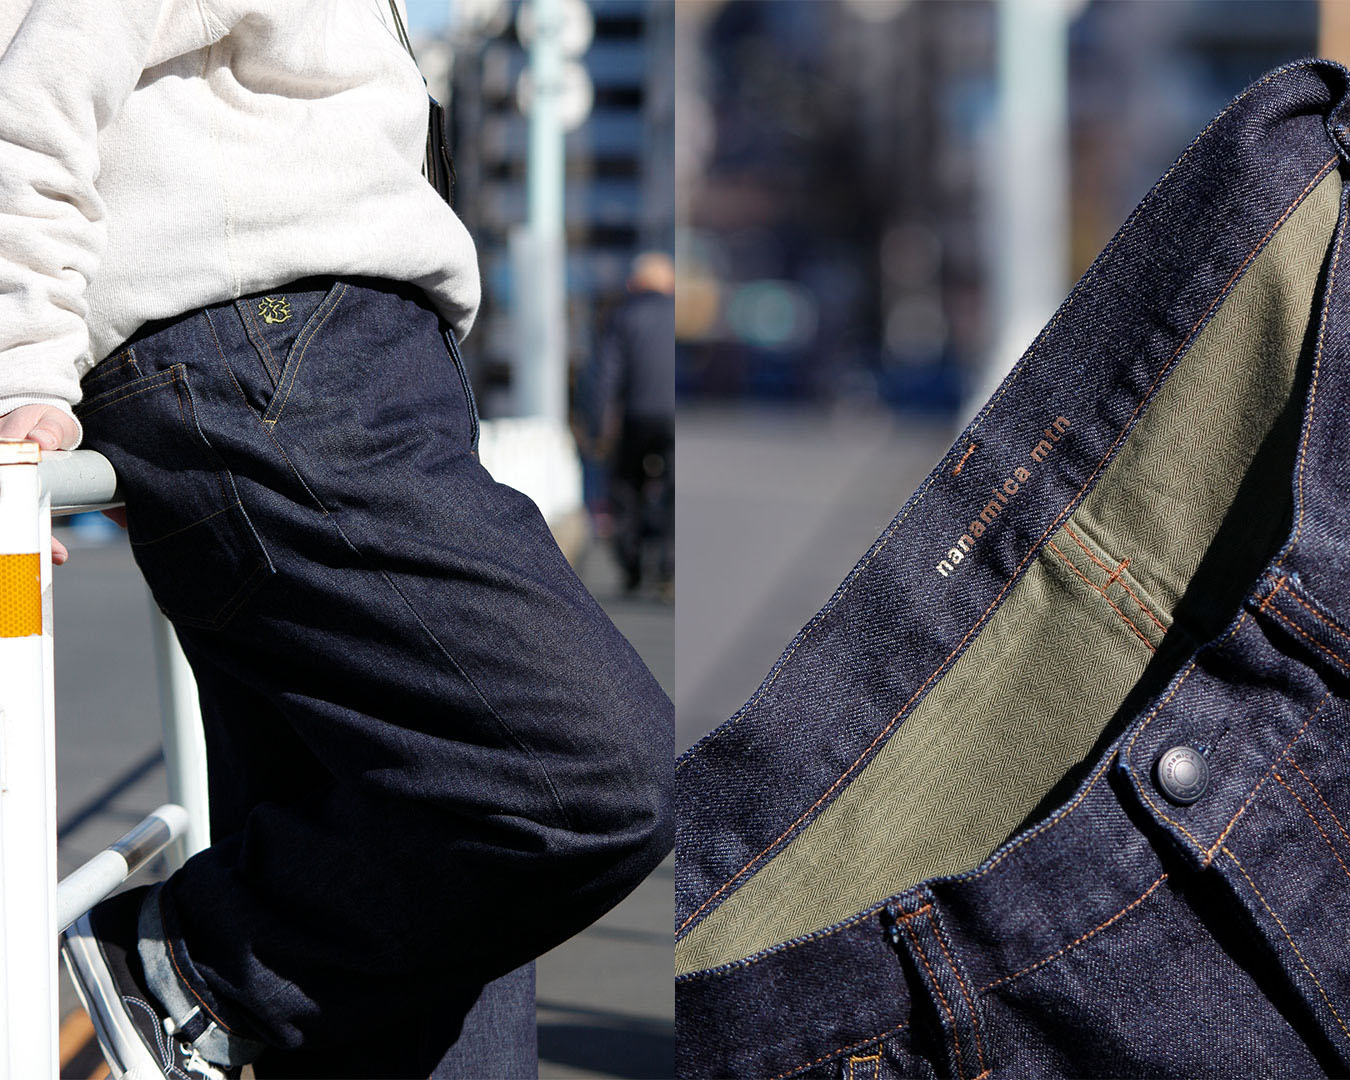 nanamica / nanamica MOUNTAIN store exclusive product “CCY Selvedge 